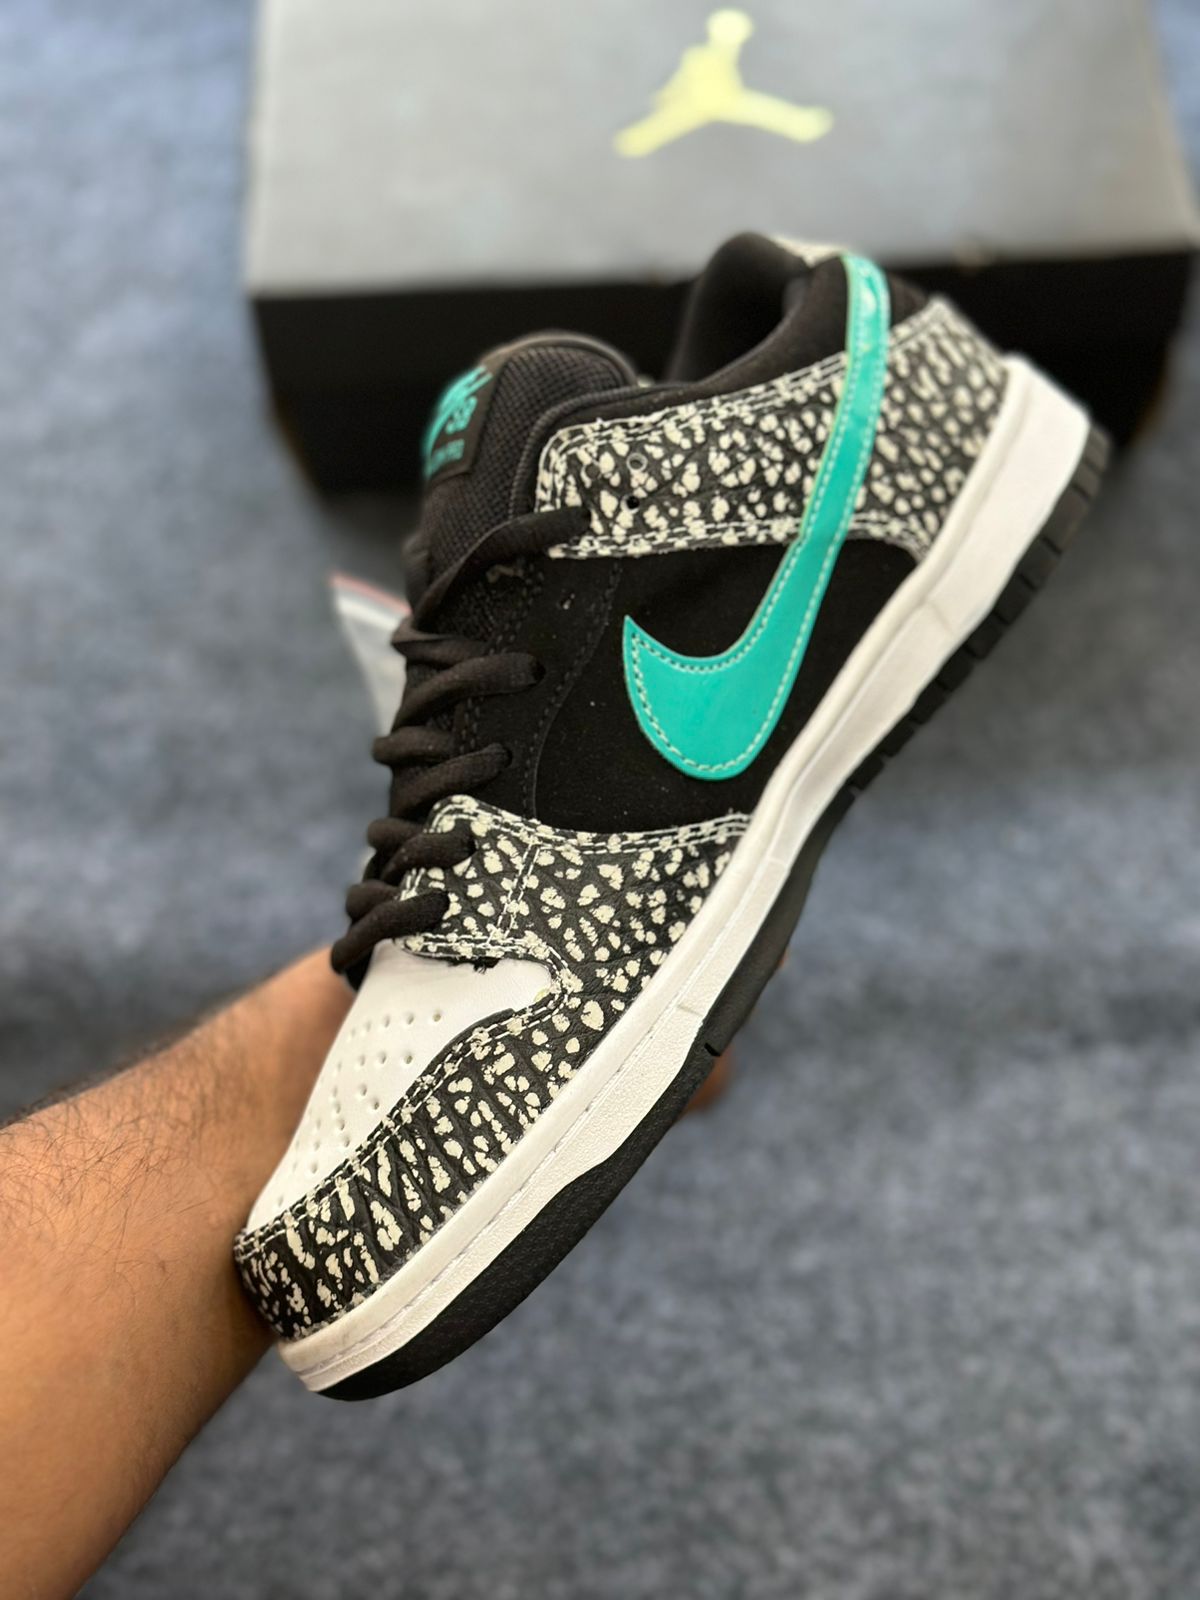 SB Dunk Atmos Elephant Sneakers In Stock